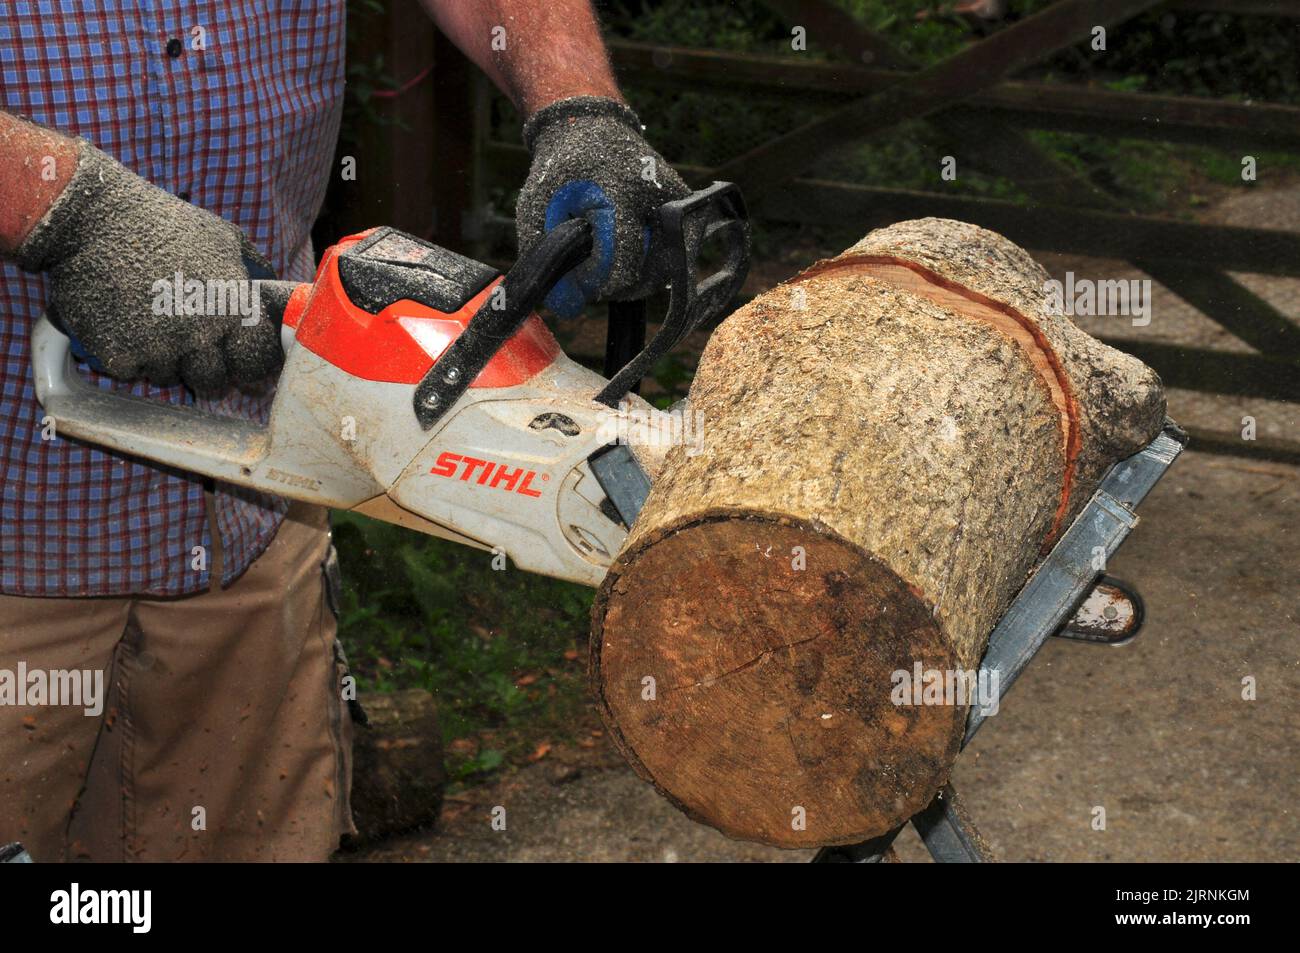 Cutting logs in readiness for winter. Stock Photo